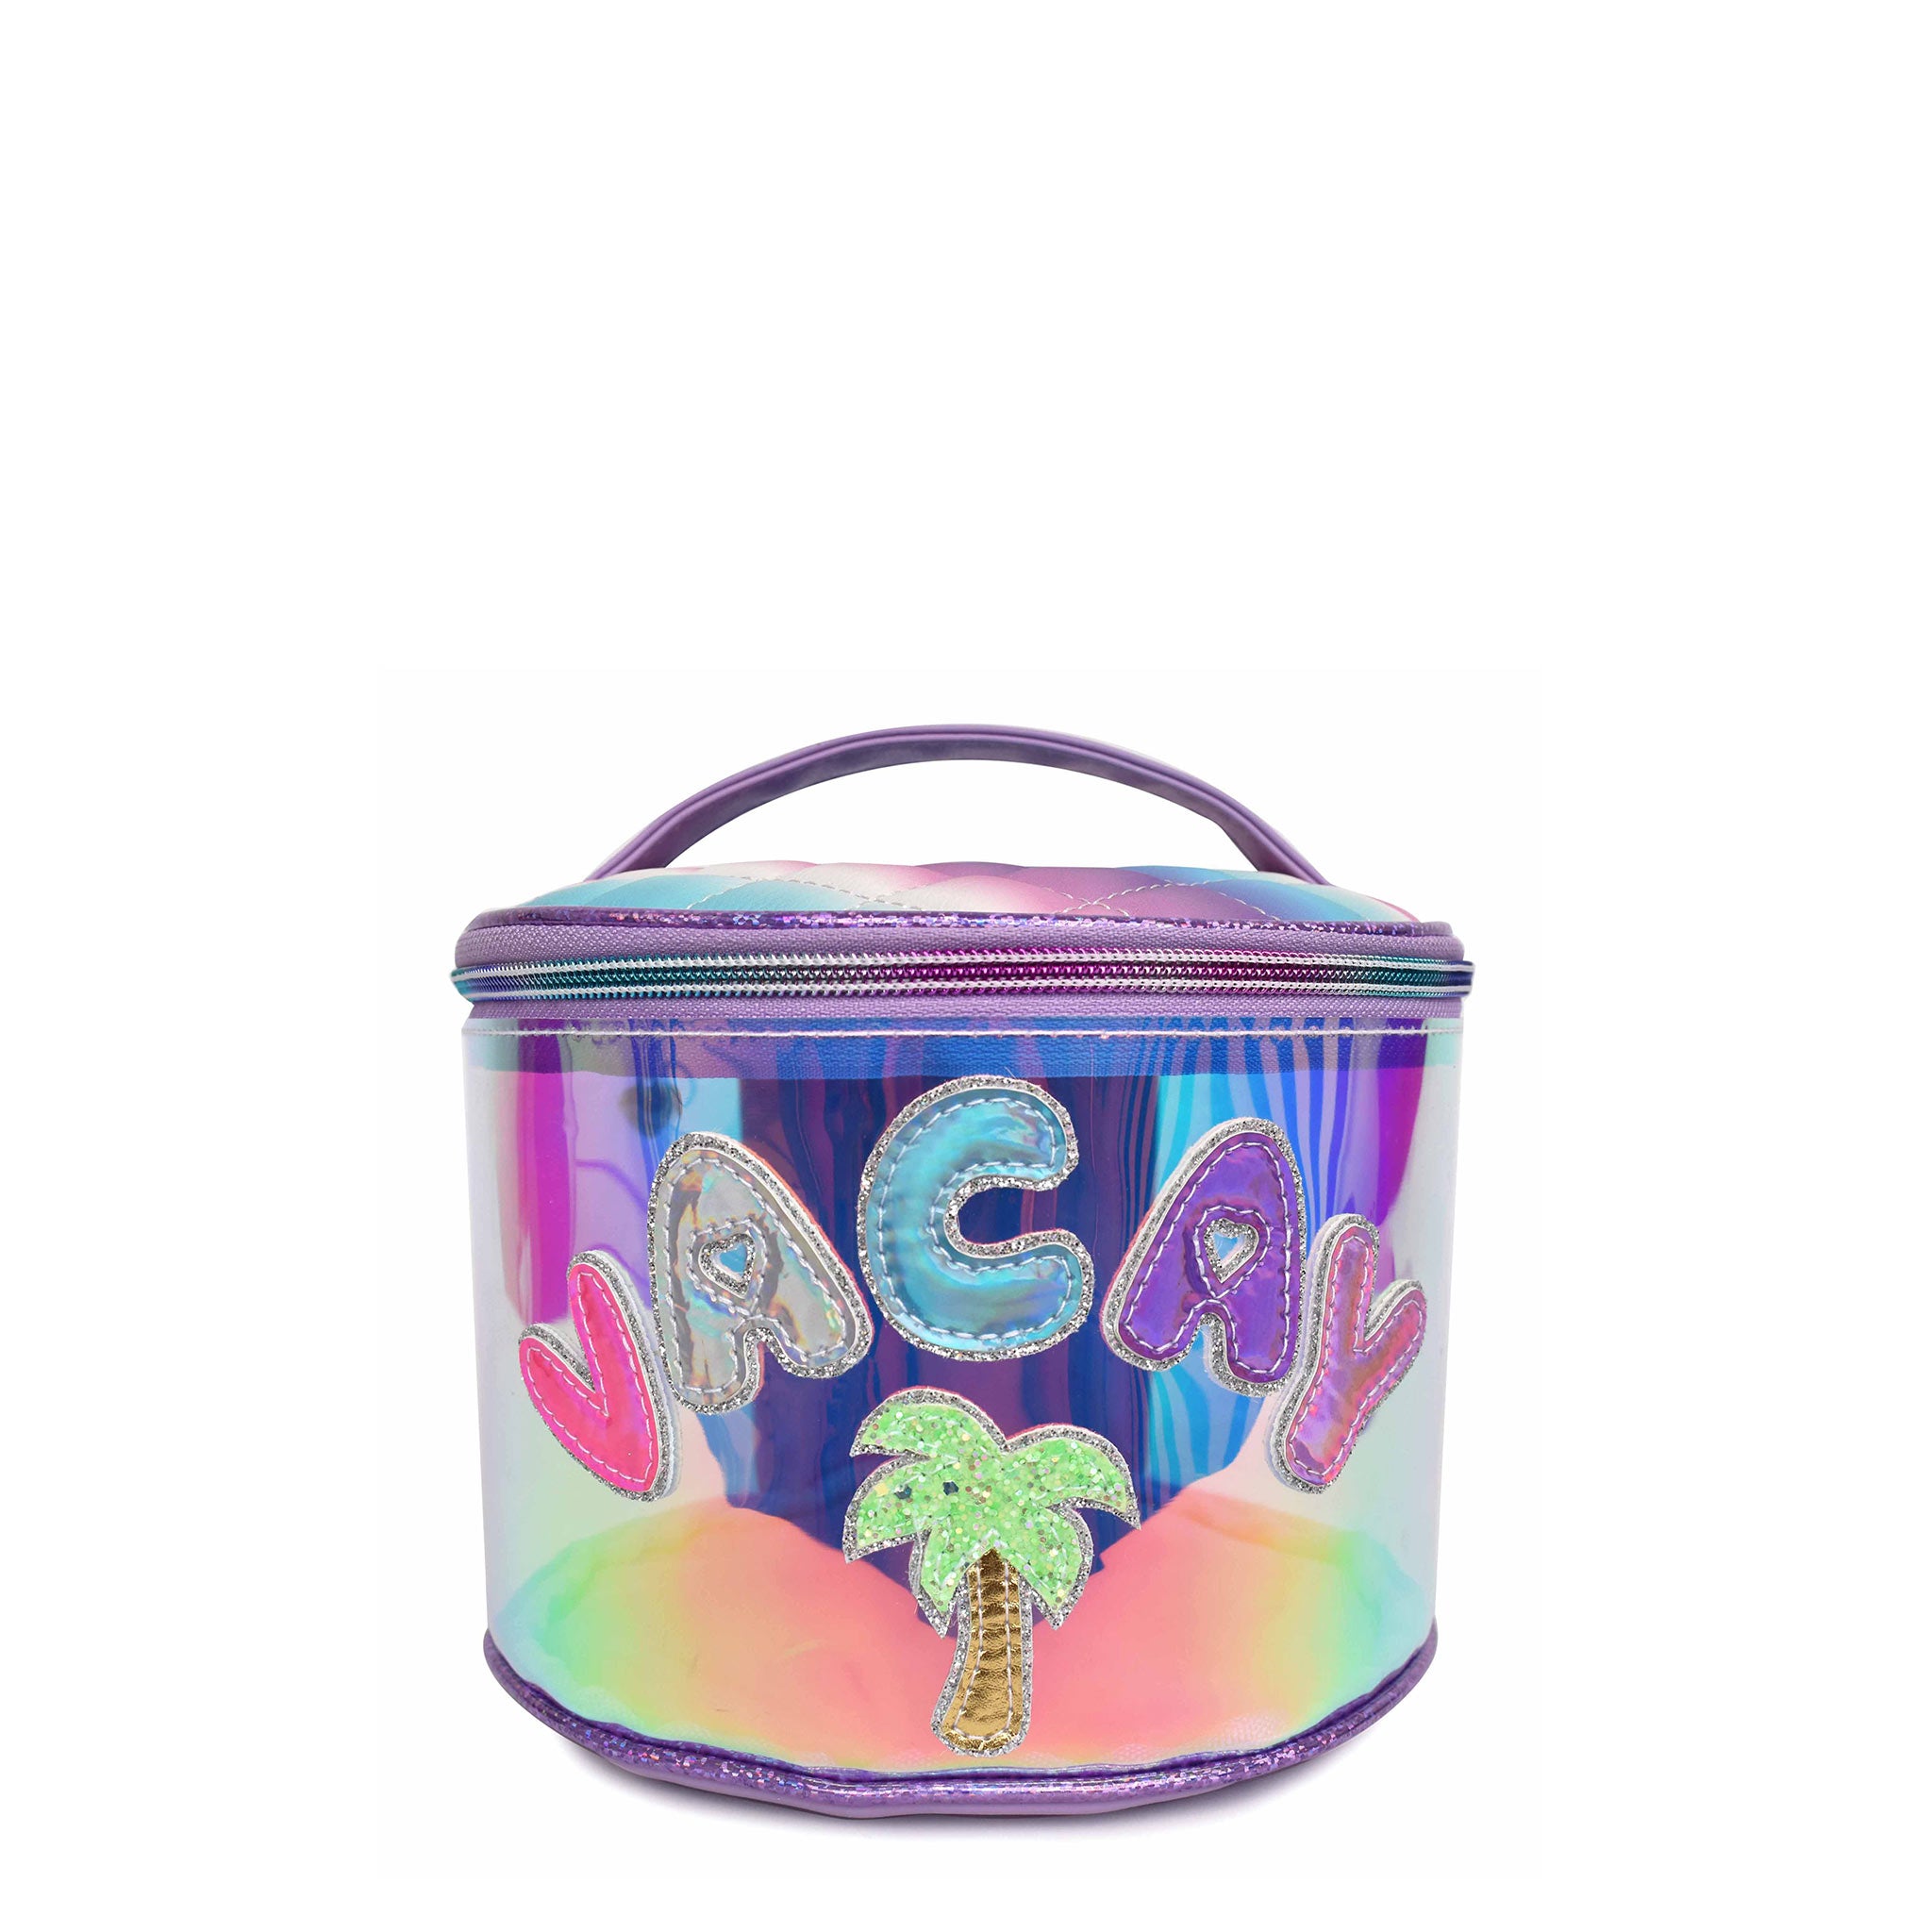 Front view of clear glazed round 'Vacay' glam bag with palm tree patch